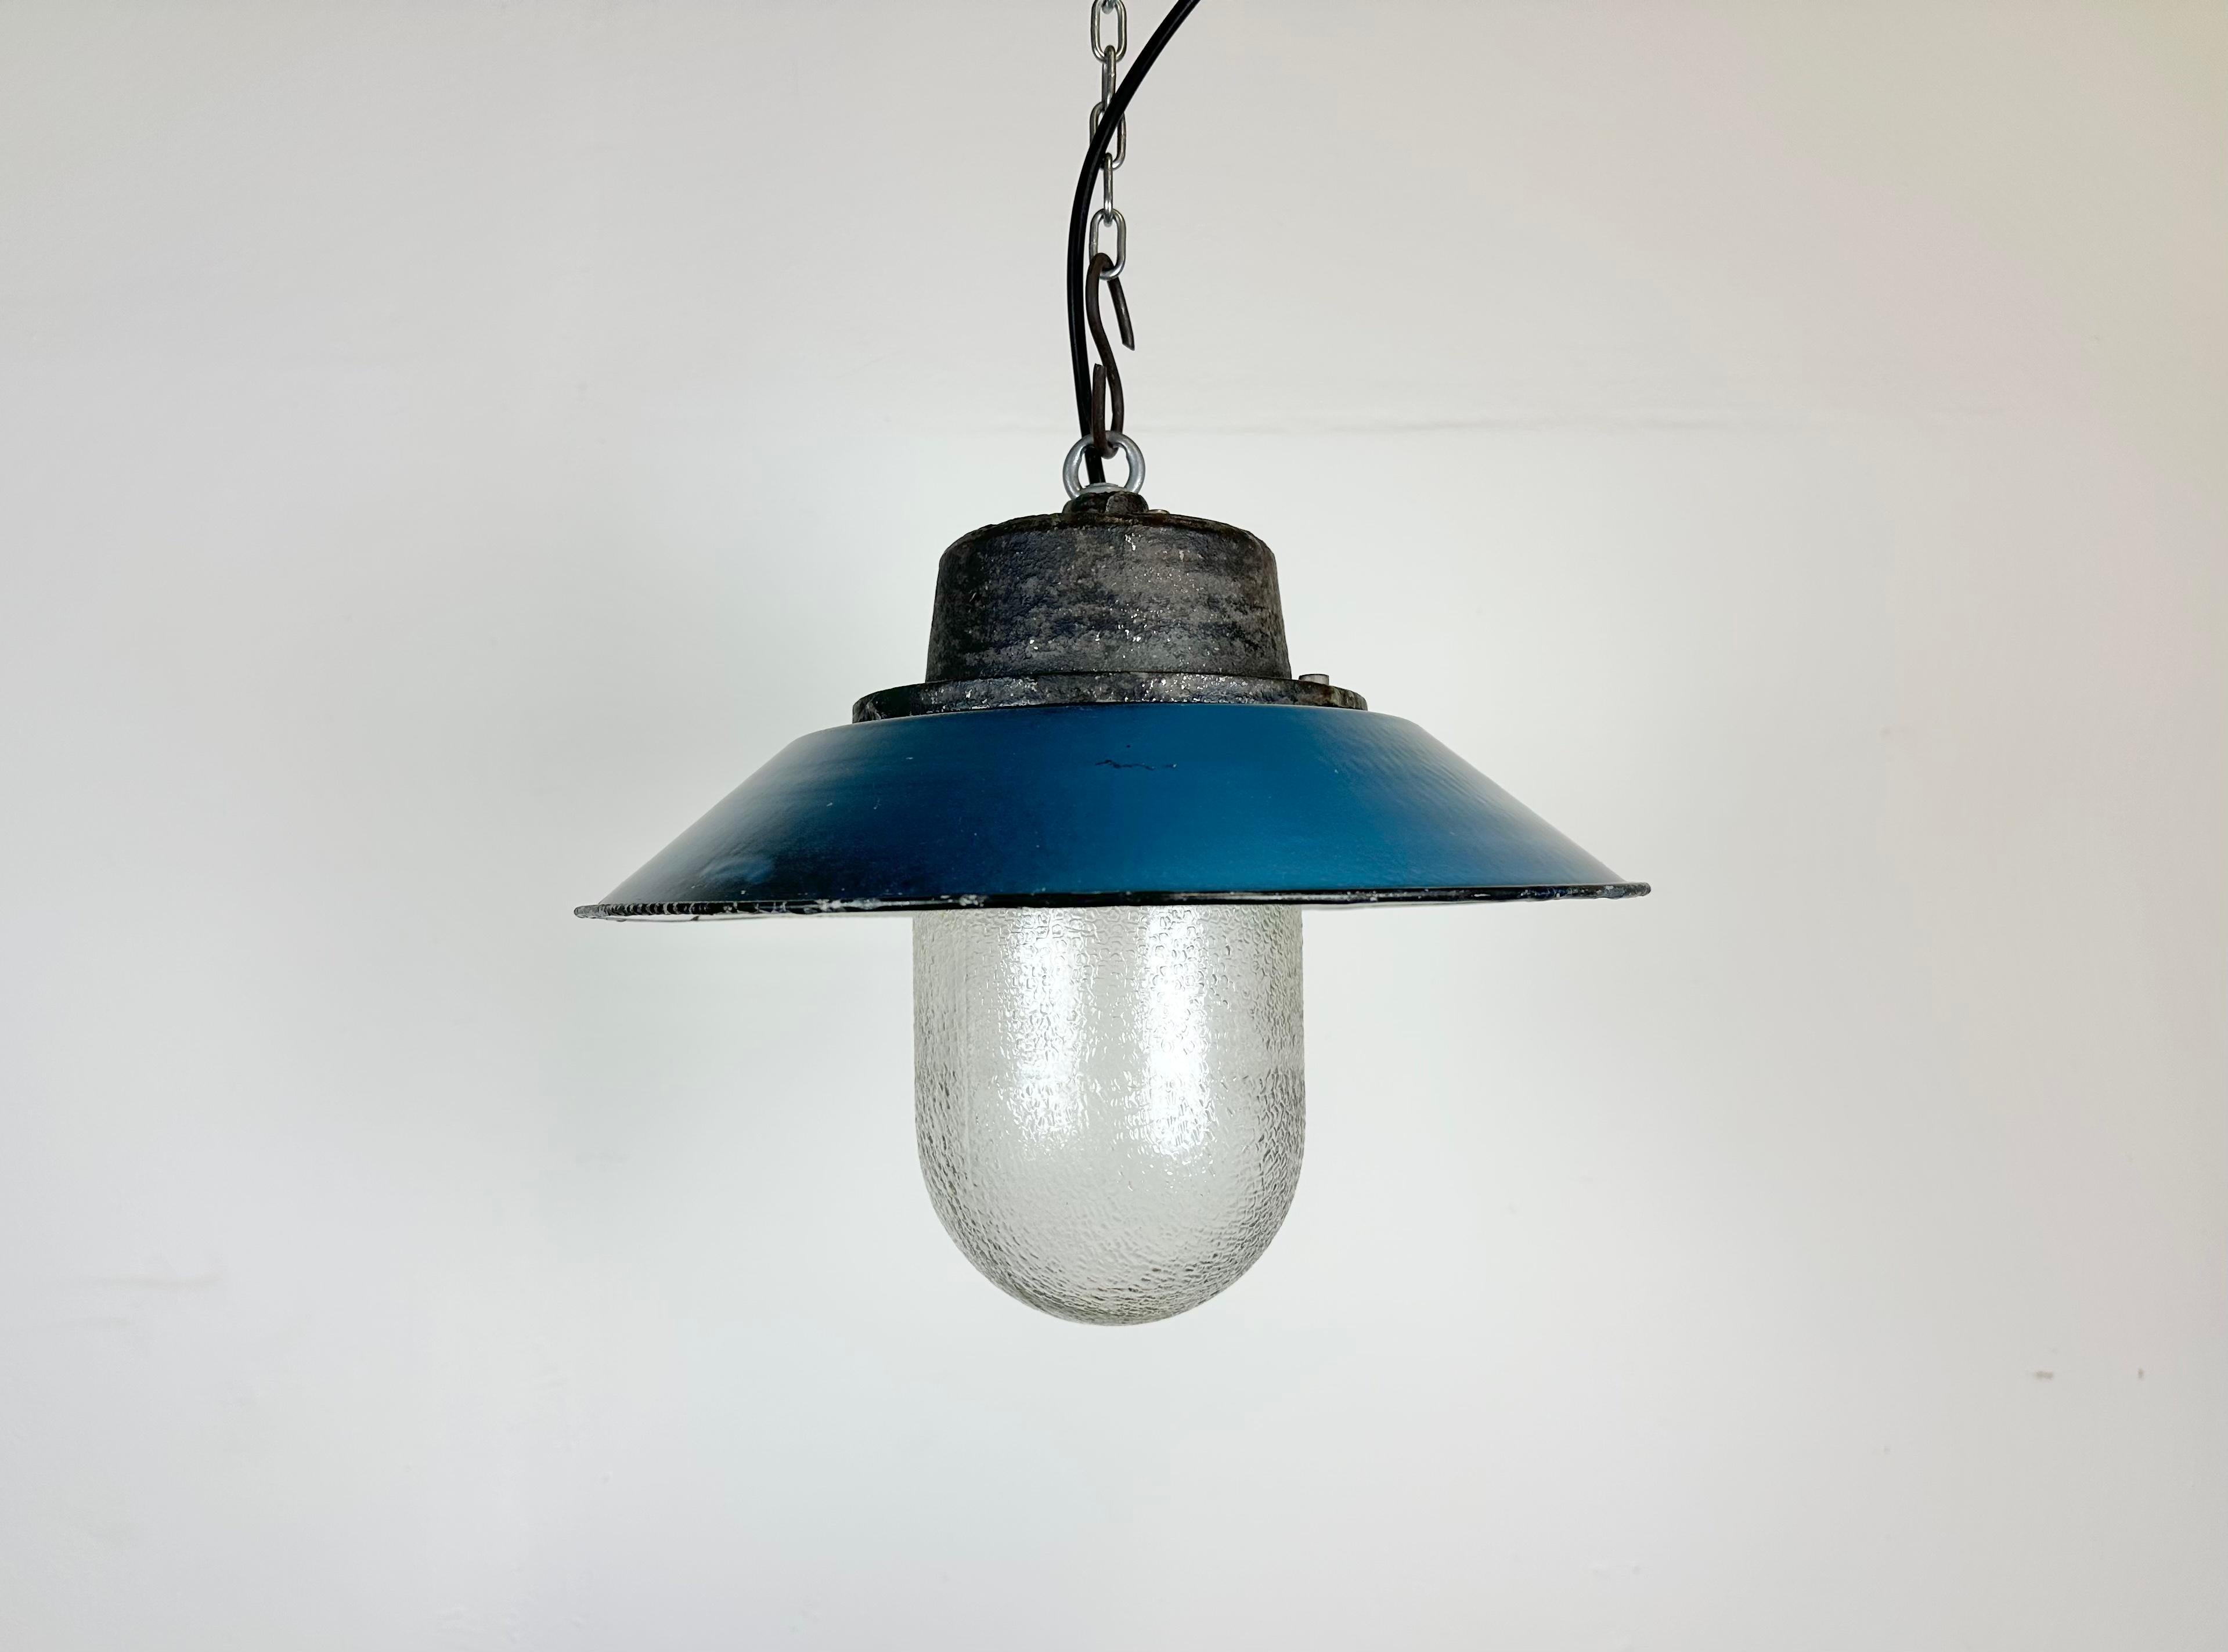 Industrial hanging lamp manufactured in Poland during the 1960s. It features a blue enamel shade with white enamel interior, a cast iron top and a frosted glass cover. The porcelain socket requires E 27/ E26 lightbulbs .New wire. The weight of the